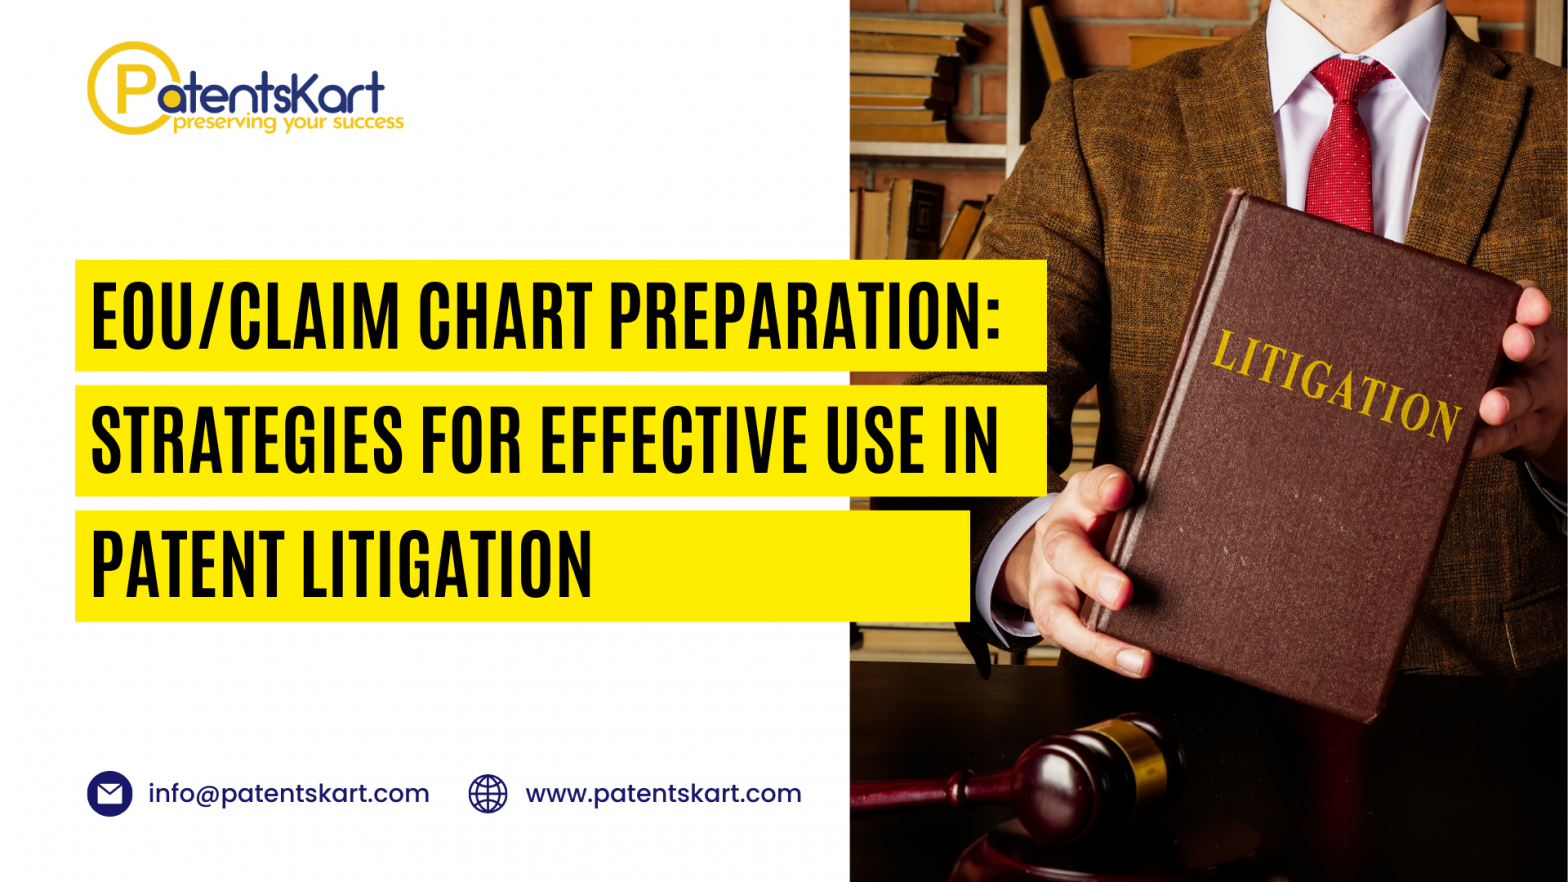 EoU/Claim Chart Preparation, patent litigation, evidence of use